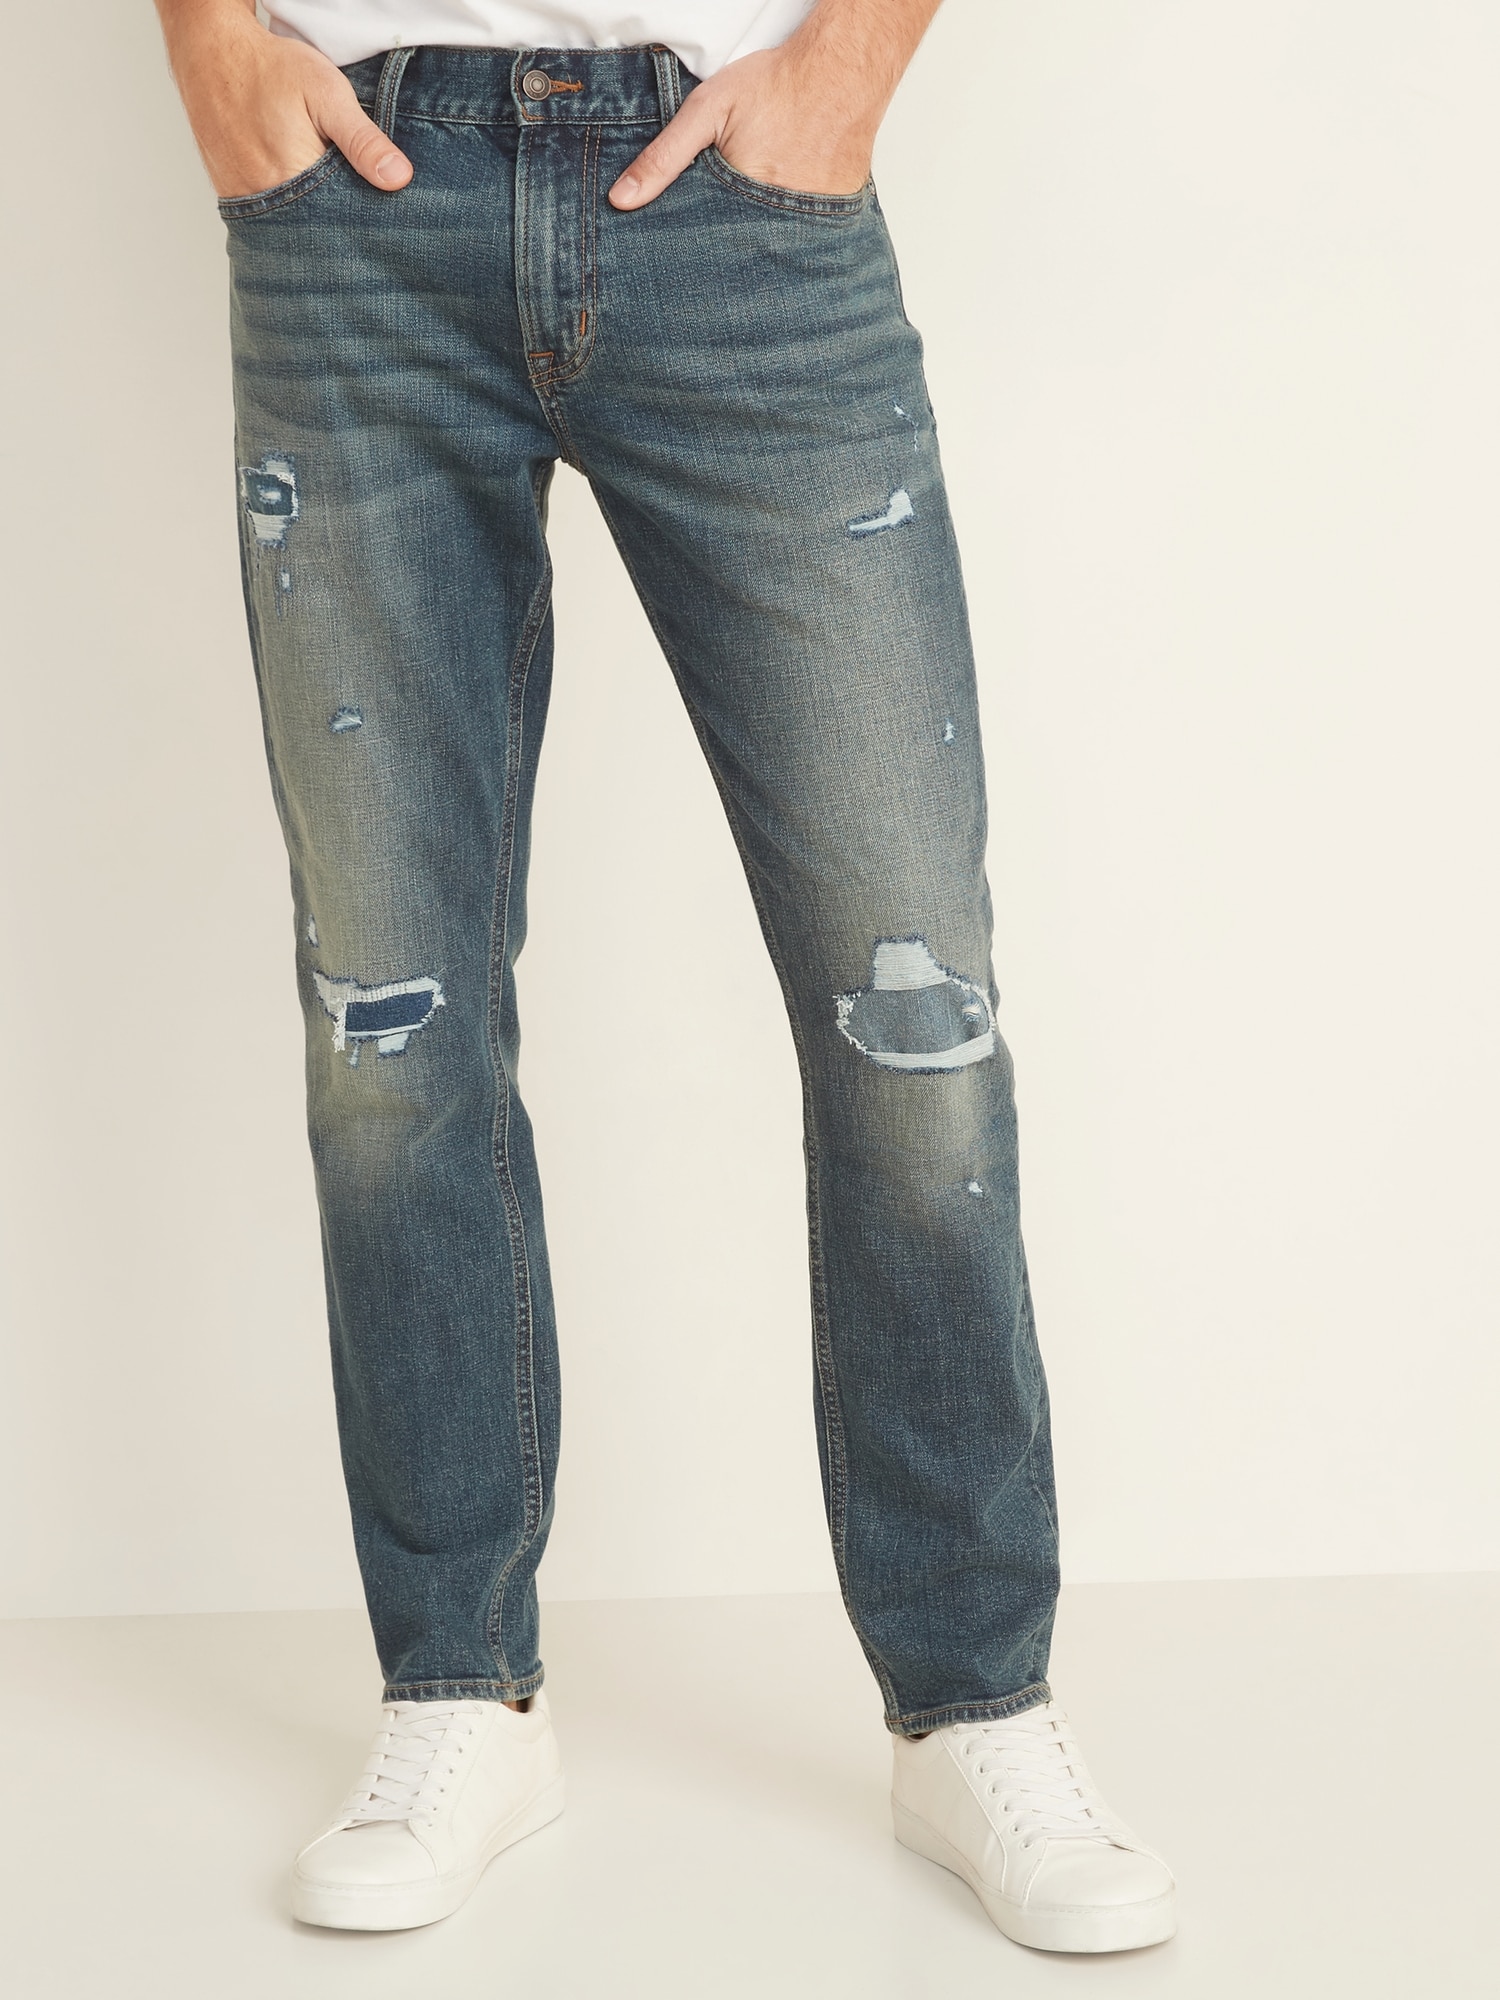 distressed jeans back